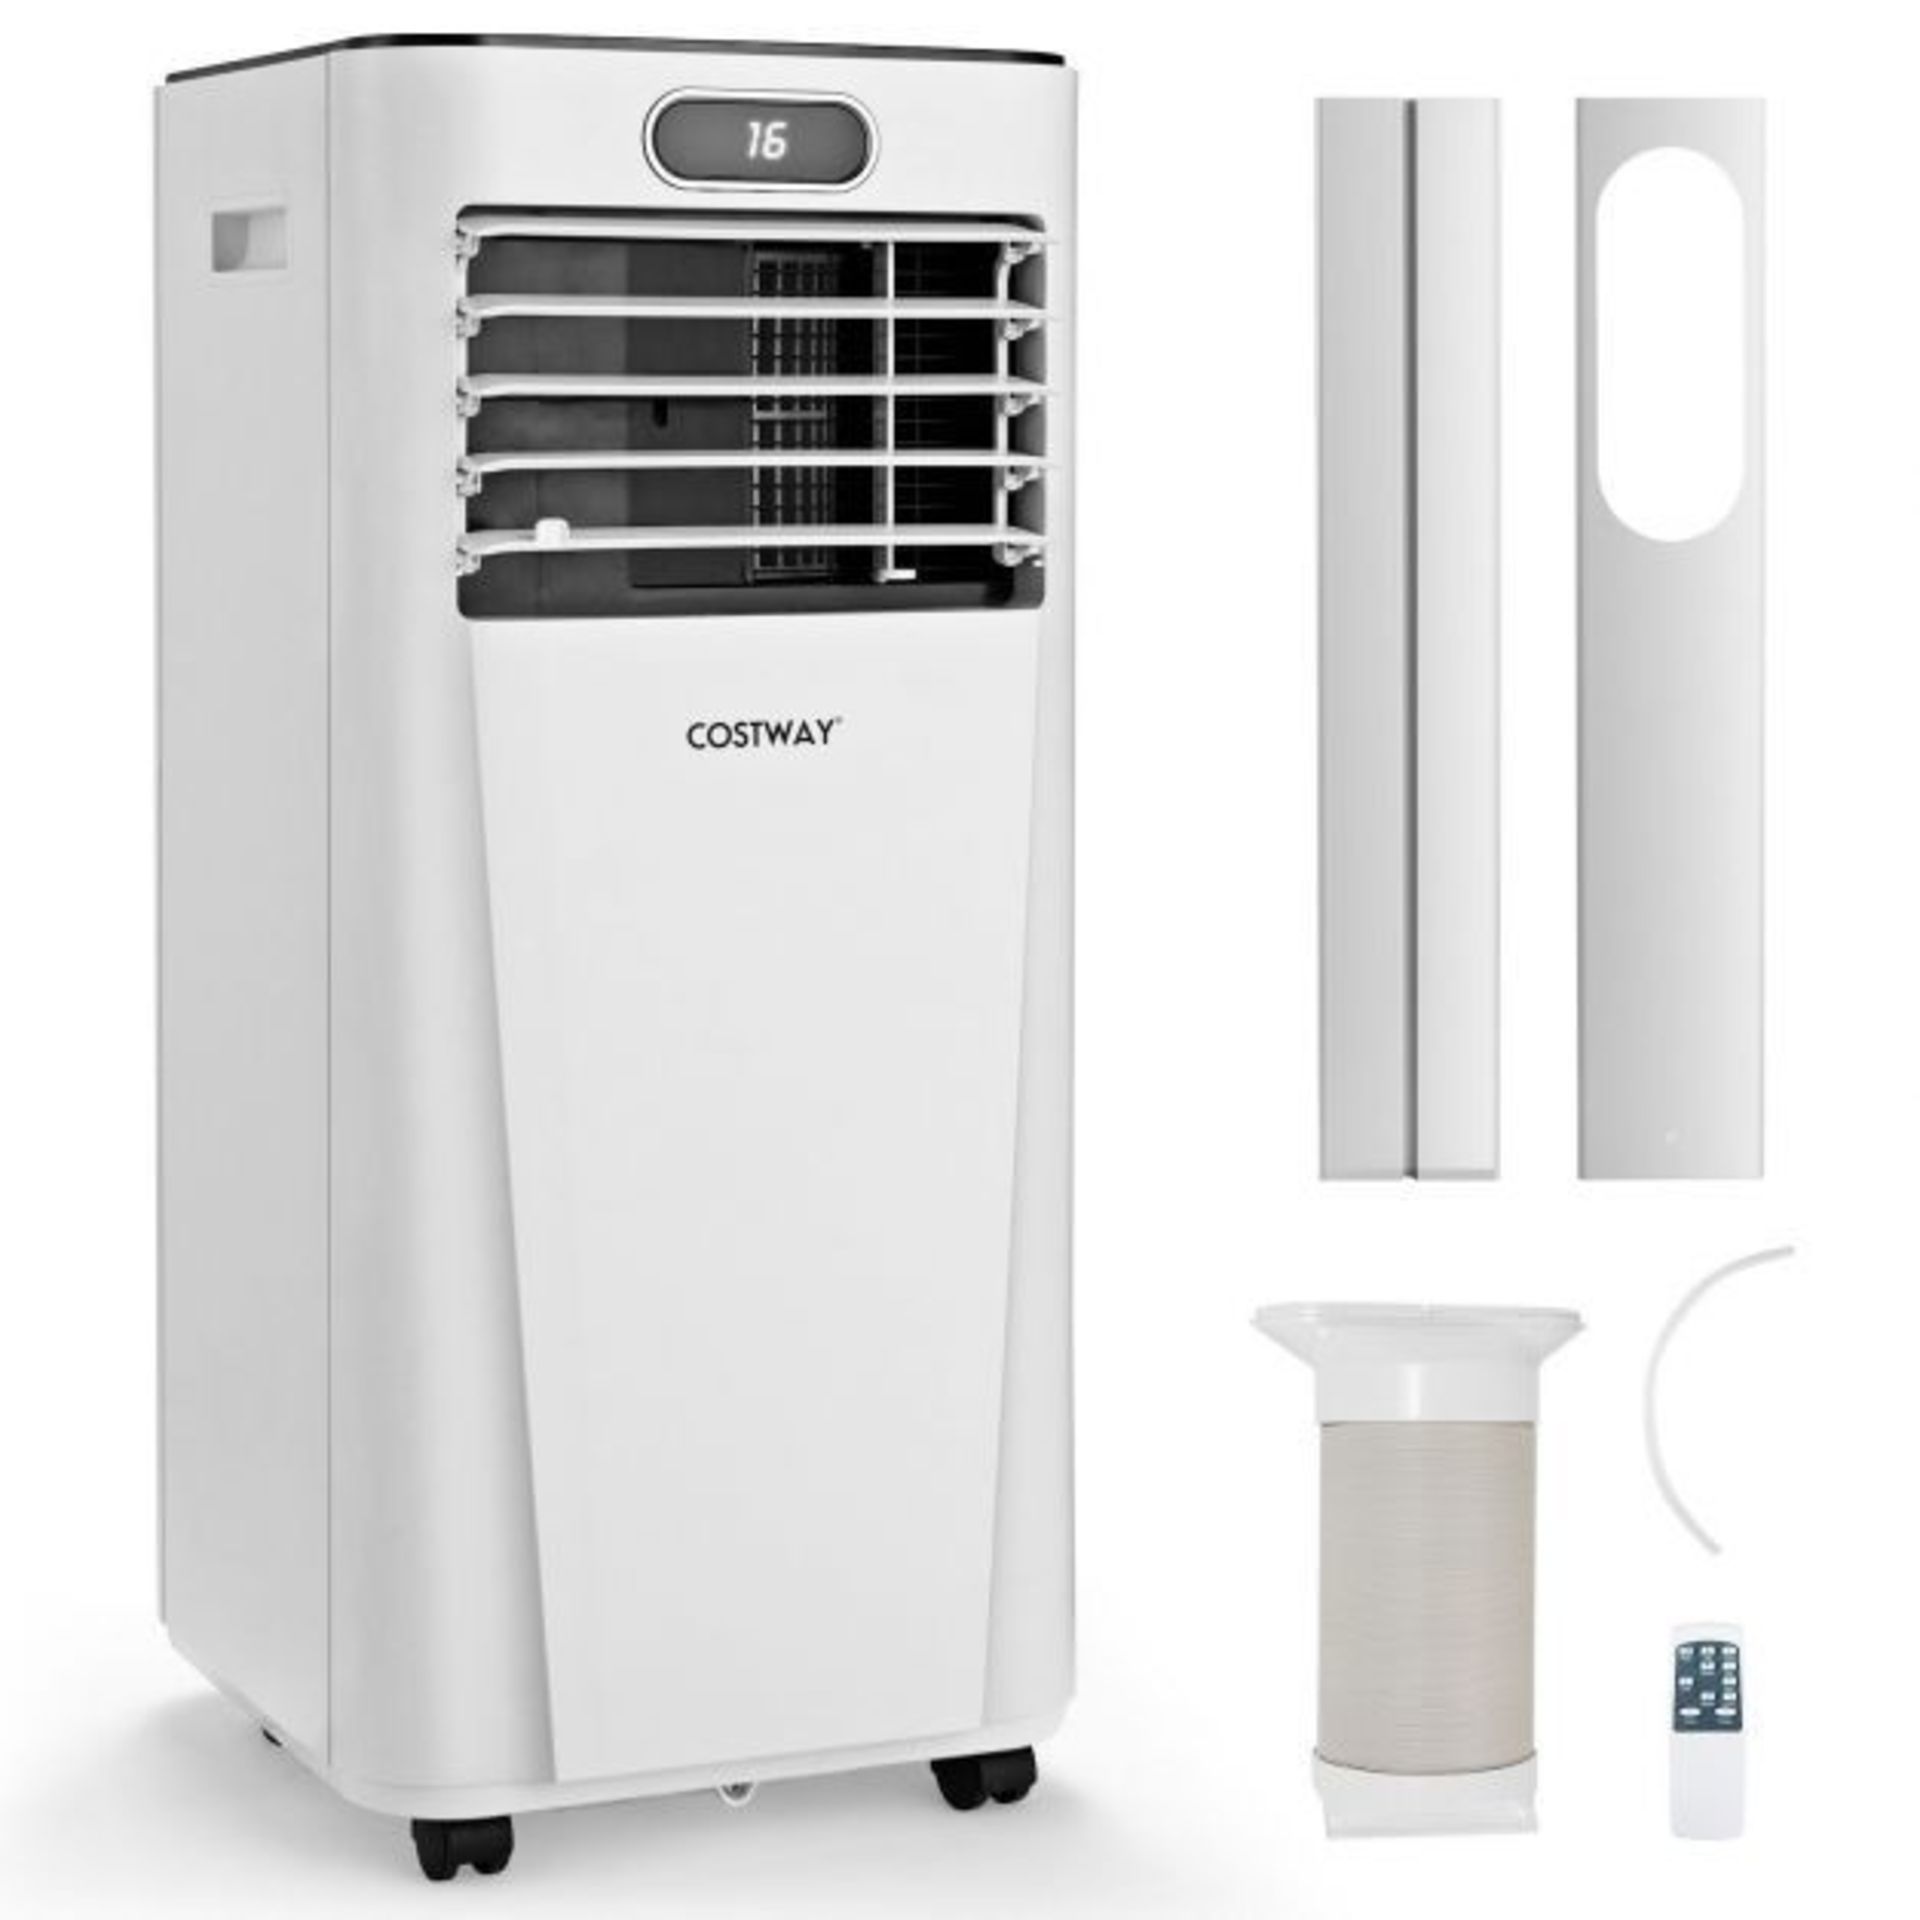 Portable 3-in-1 Air Conditioner with Remote Control and Sleep Mode. - ER53. This 7000 BTU air cooler